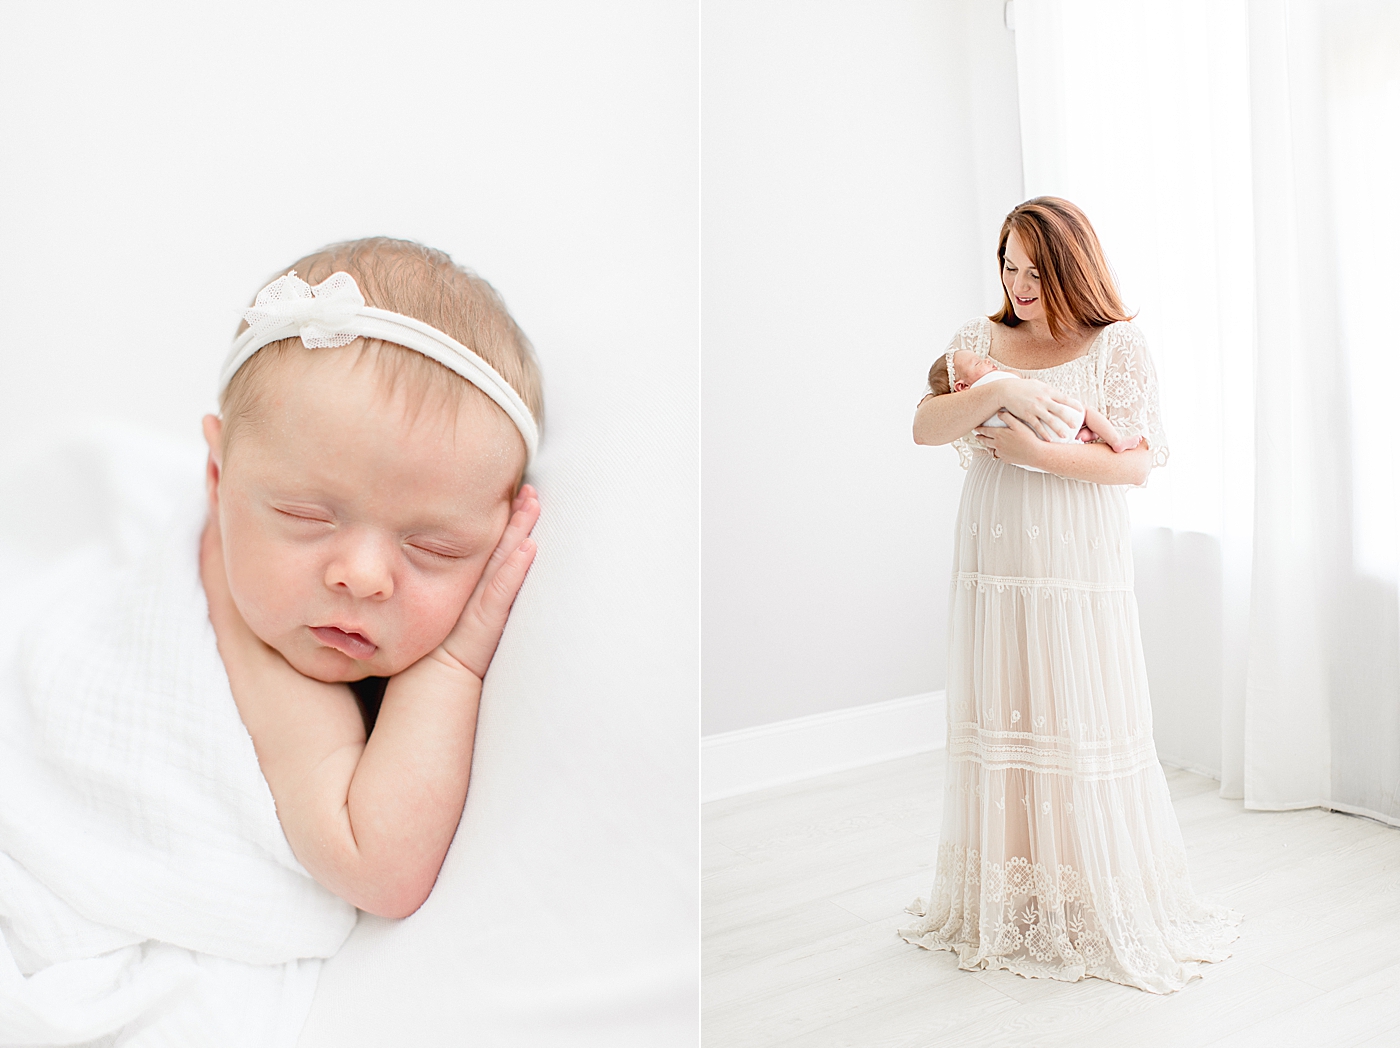 Newborn photos with baby girl in studio in Tampa. Photo by Brittany Elise Photography.